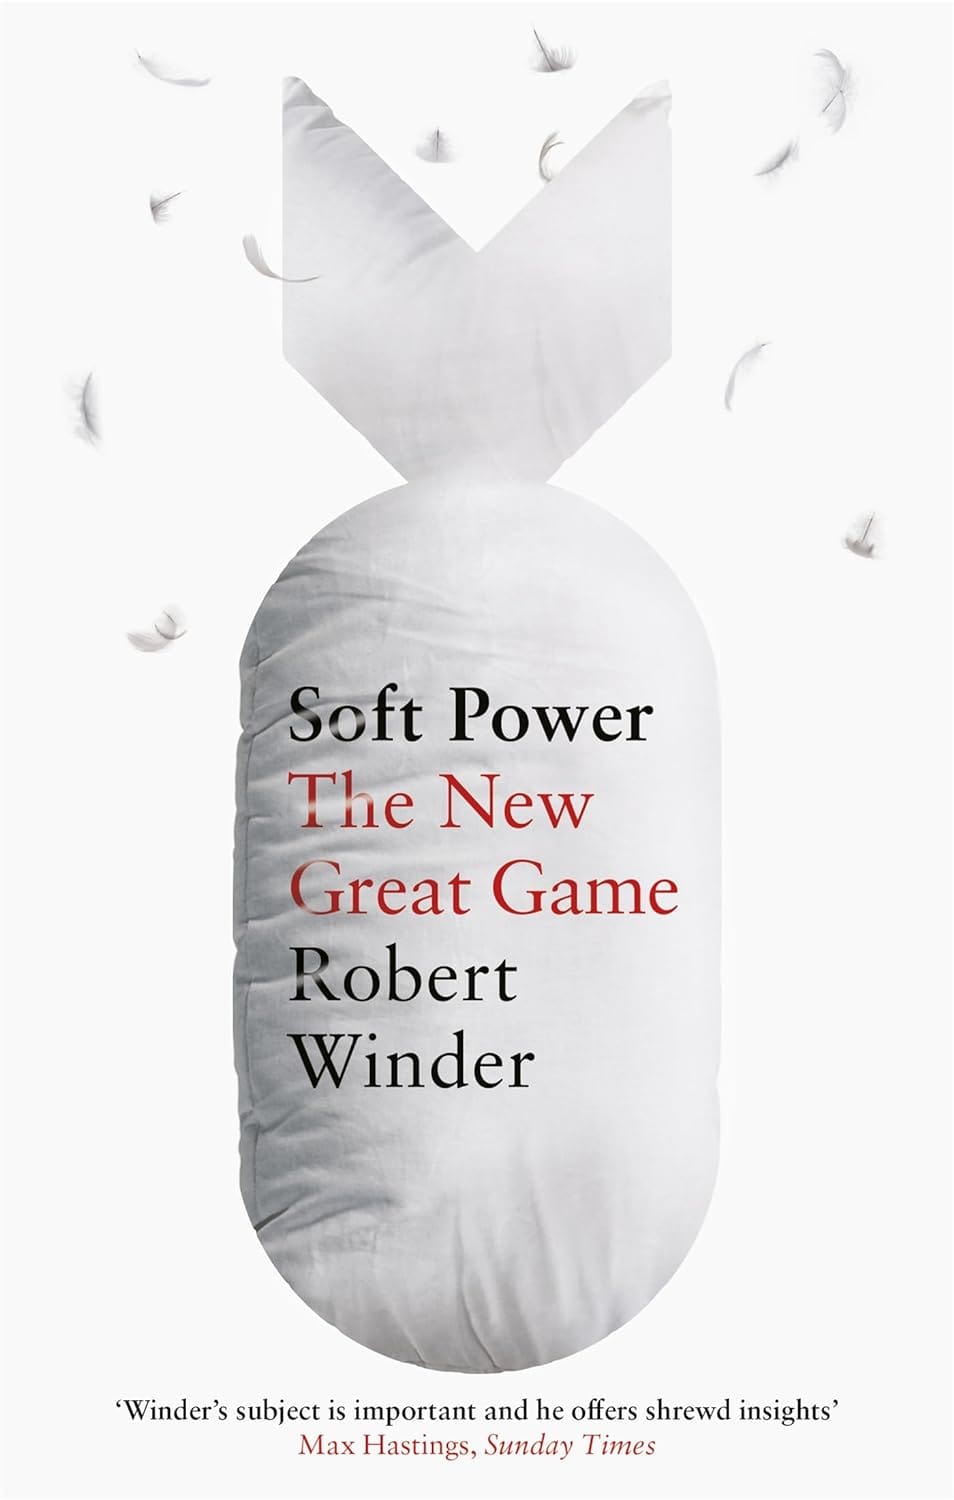 Soft Power: The New Great Game by Robert Winder